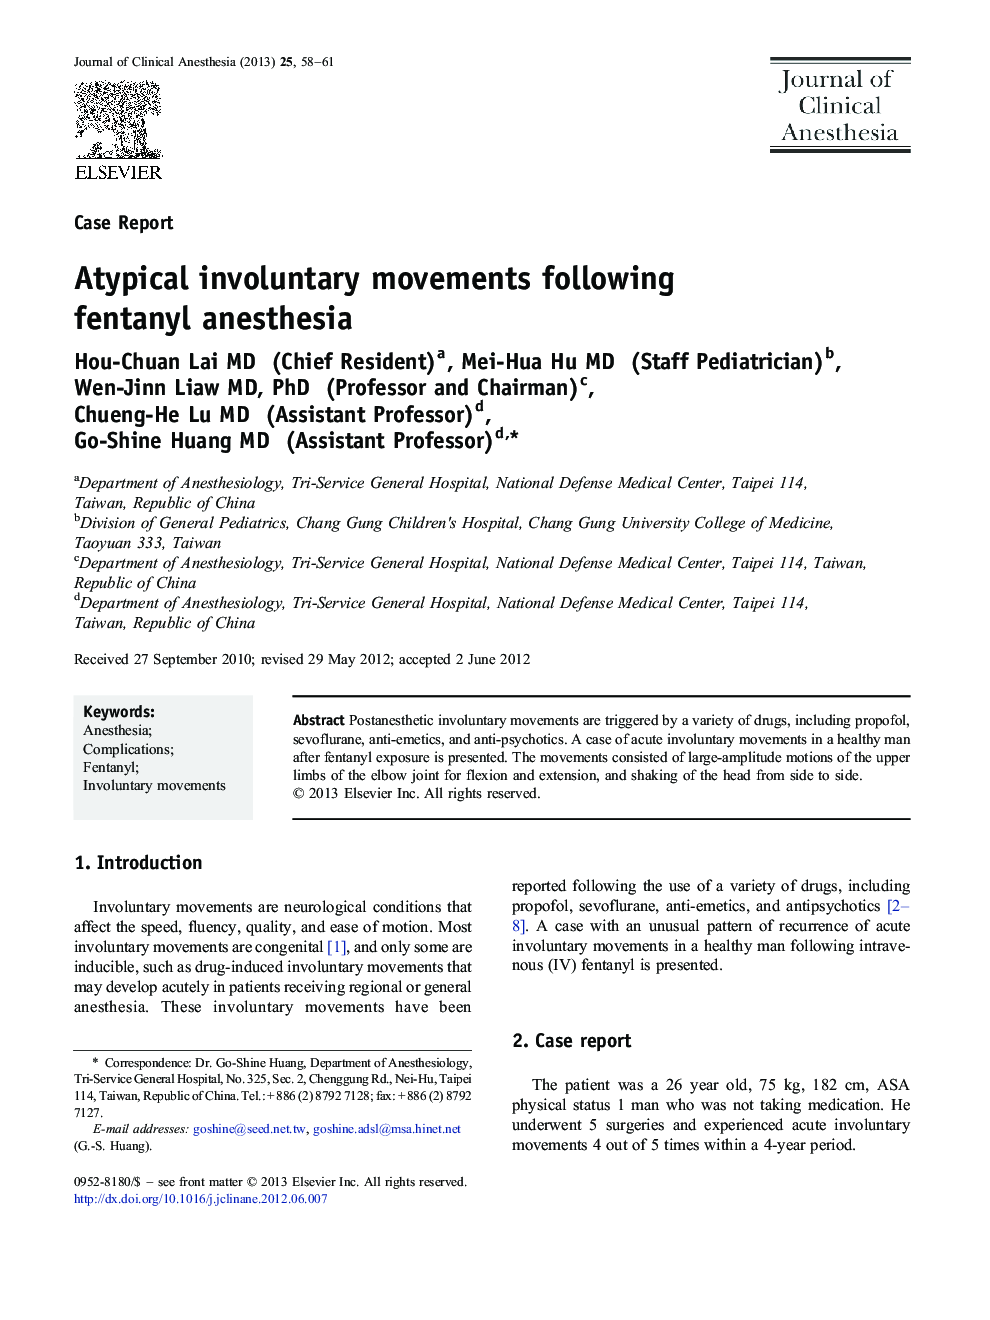 Atypical involuntary movements following fentanyl anesthesia